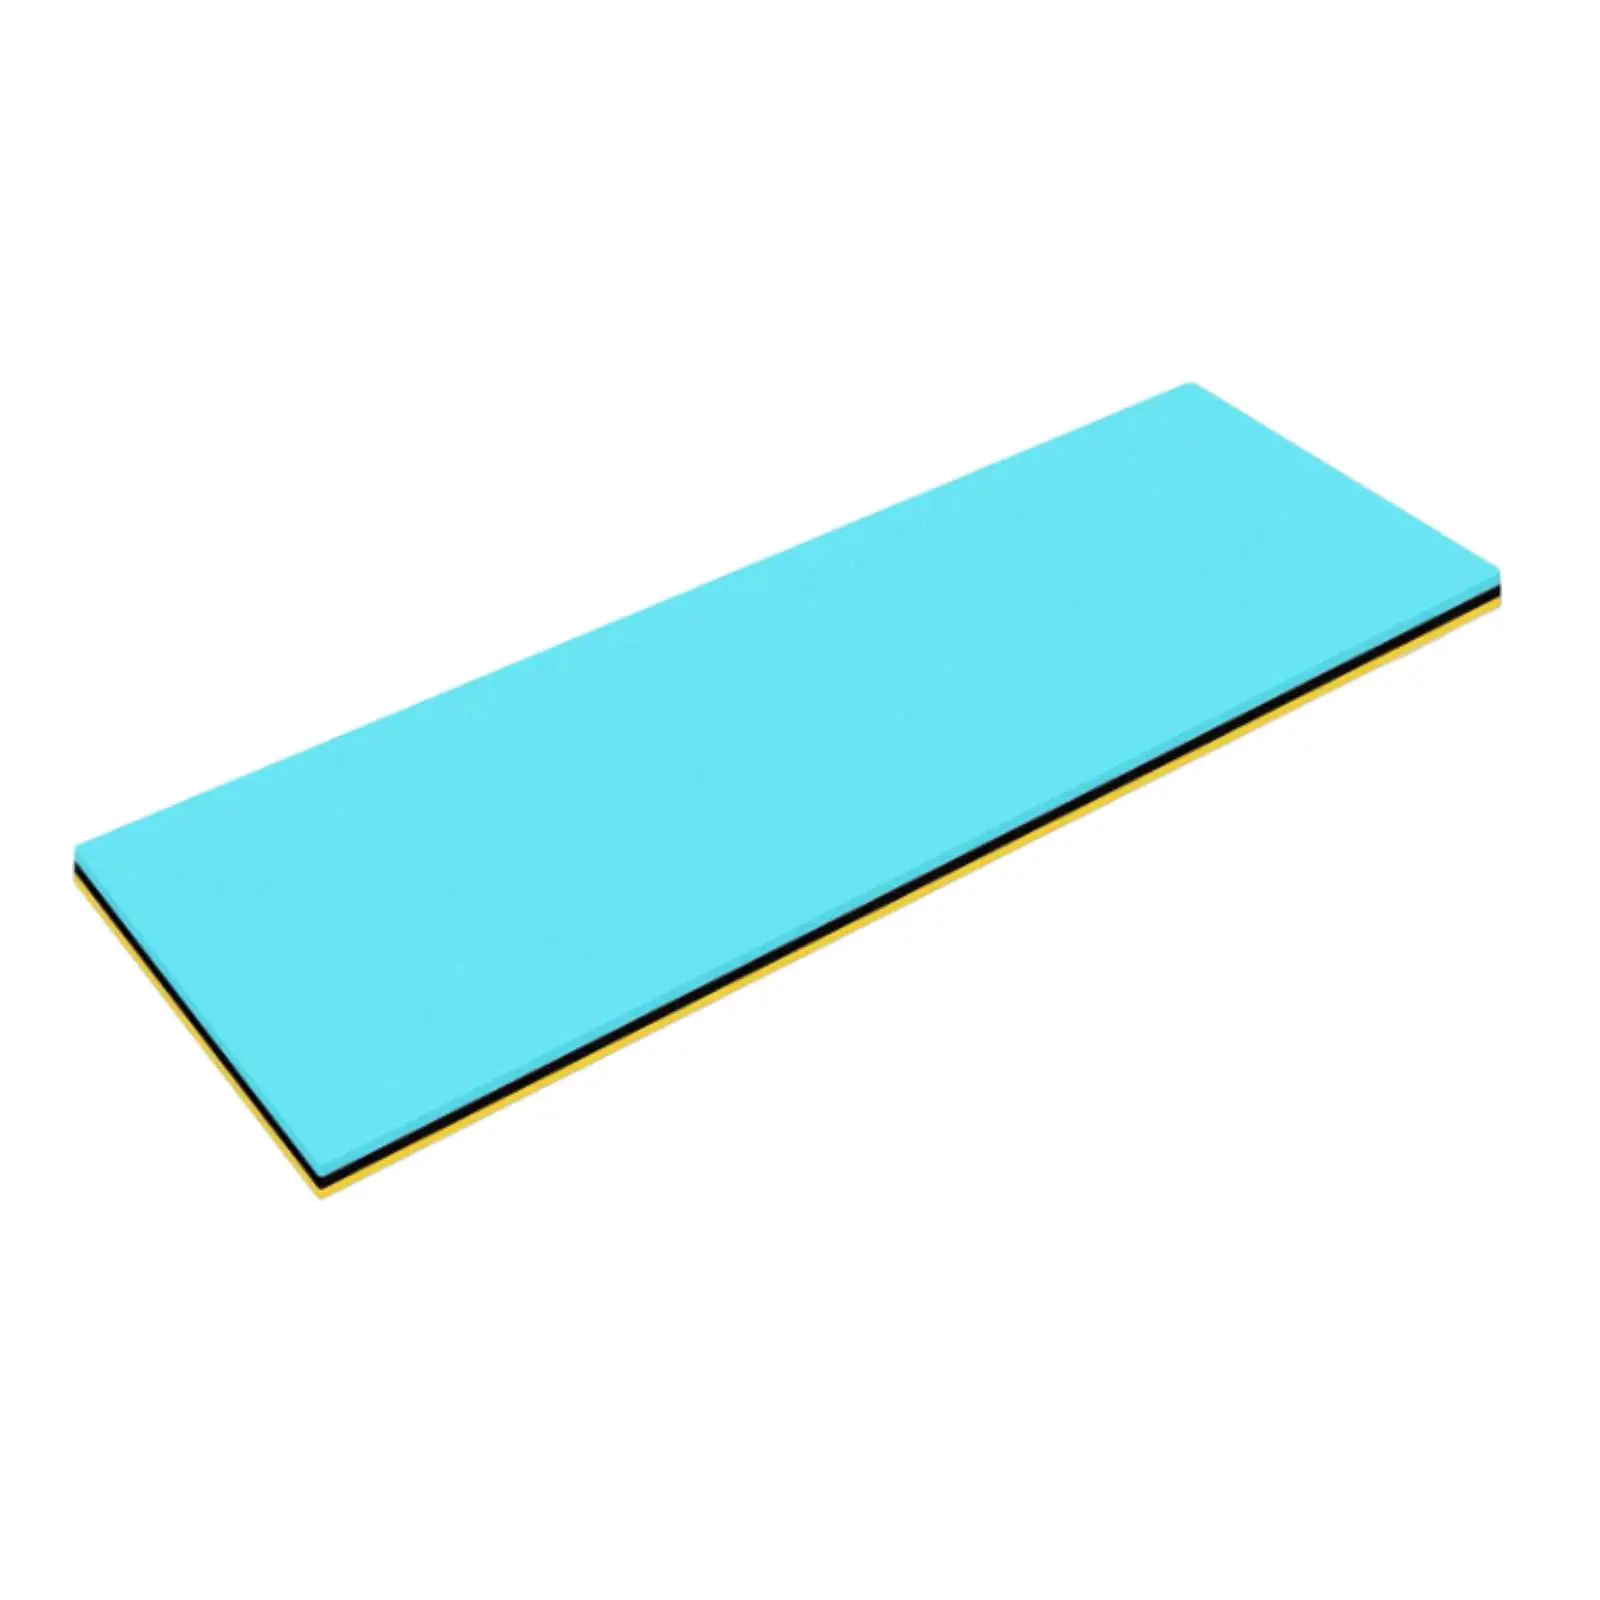 Water Floating Mat High Density Water Recreation Unsinkable Play Floats Mattress for Adults Swimming Pool Outdoor River Boating